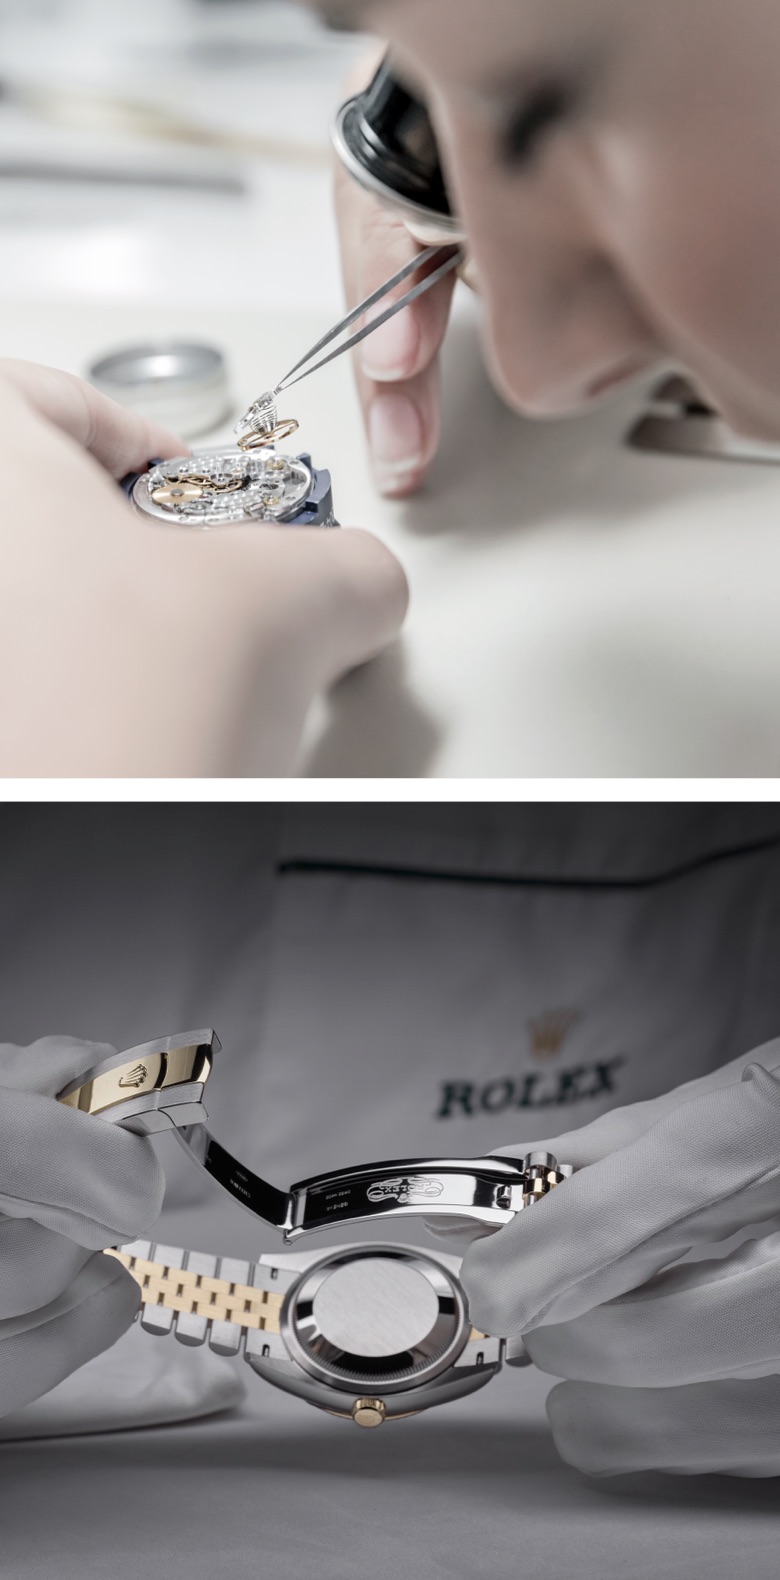 A voyage into the world of Rolex